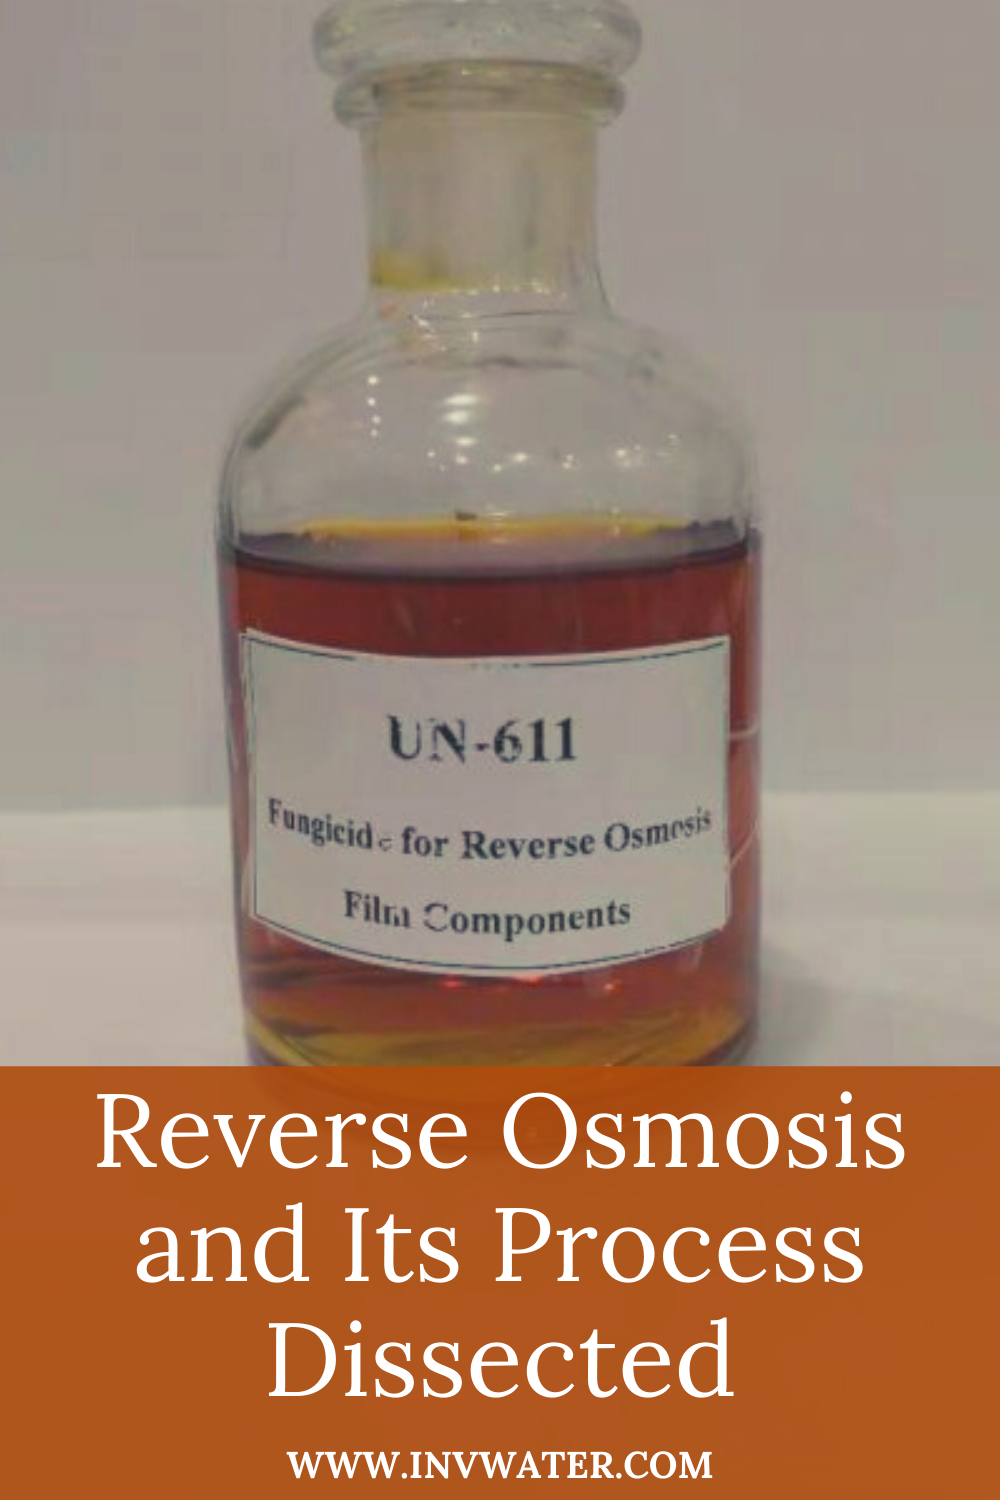 Reverse Osmosis and Its Process Dissected